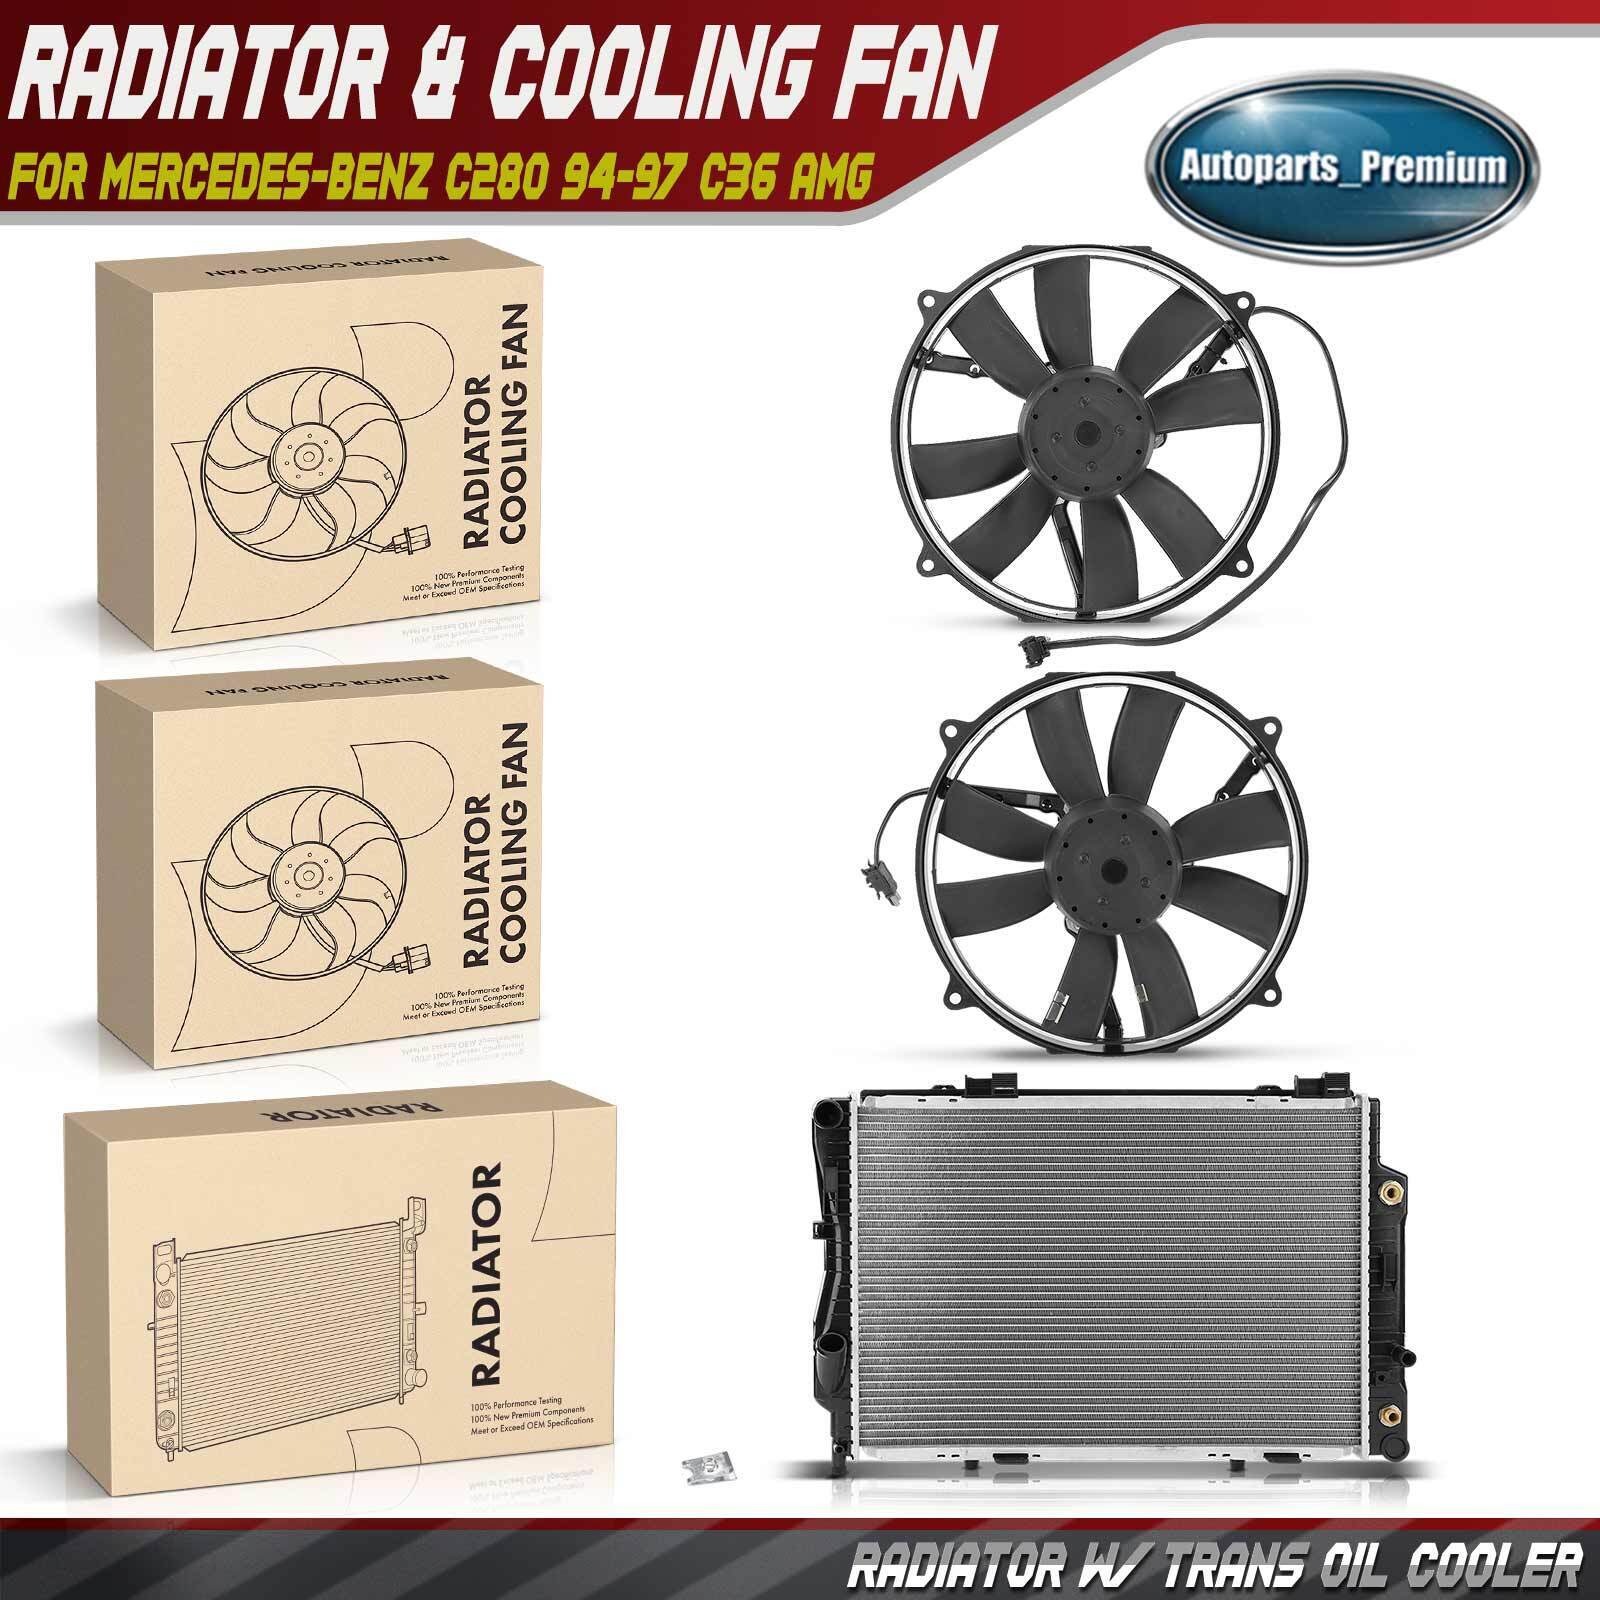 Radiator & Cooling Fan Assembly Kit for Mercedes-Benz C280 94-97 C36 AMG 95-97